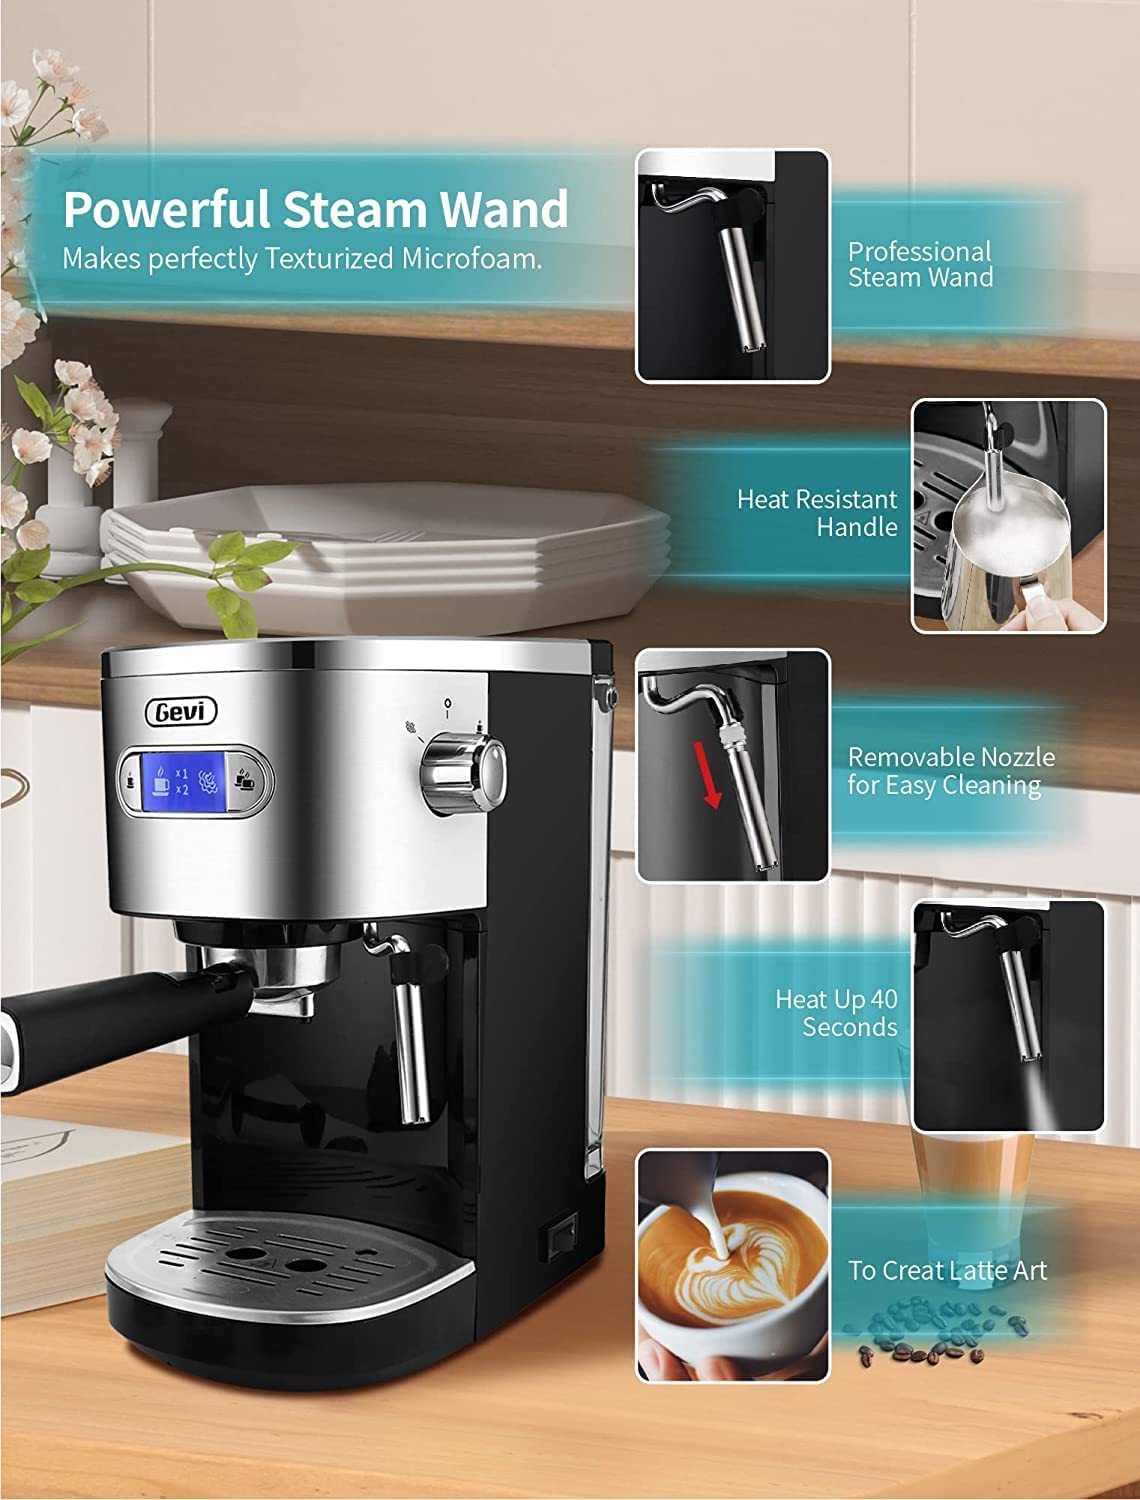 15 12-volt coffee makers for RV's (And other options for a cup of